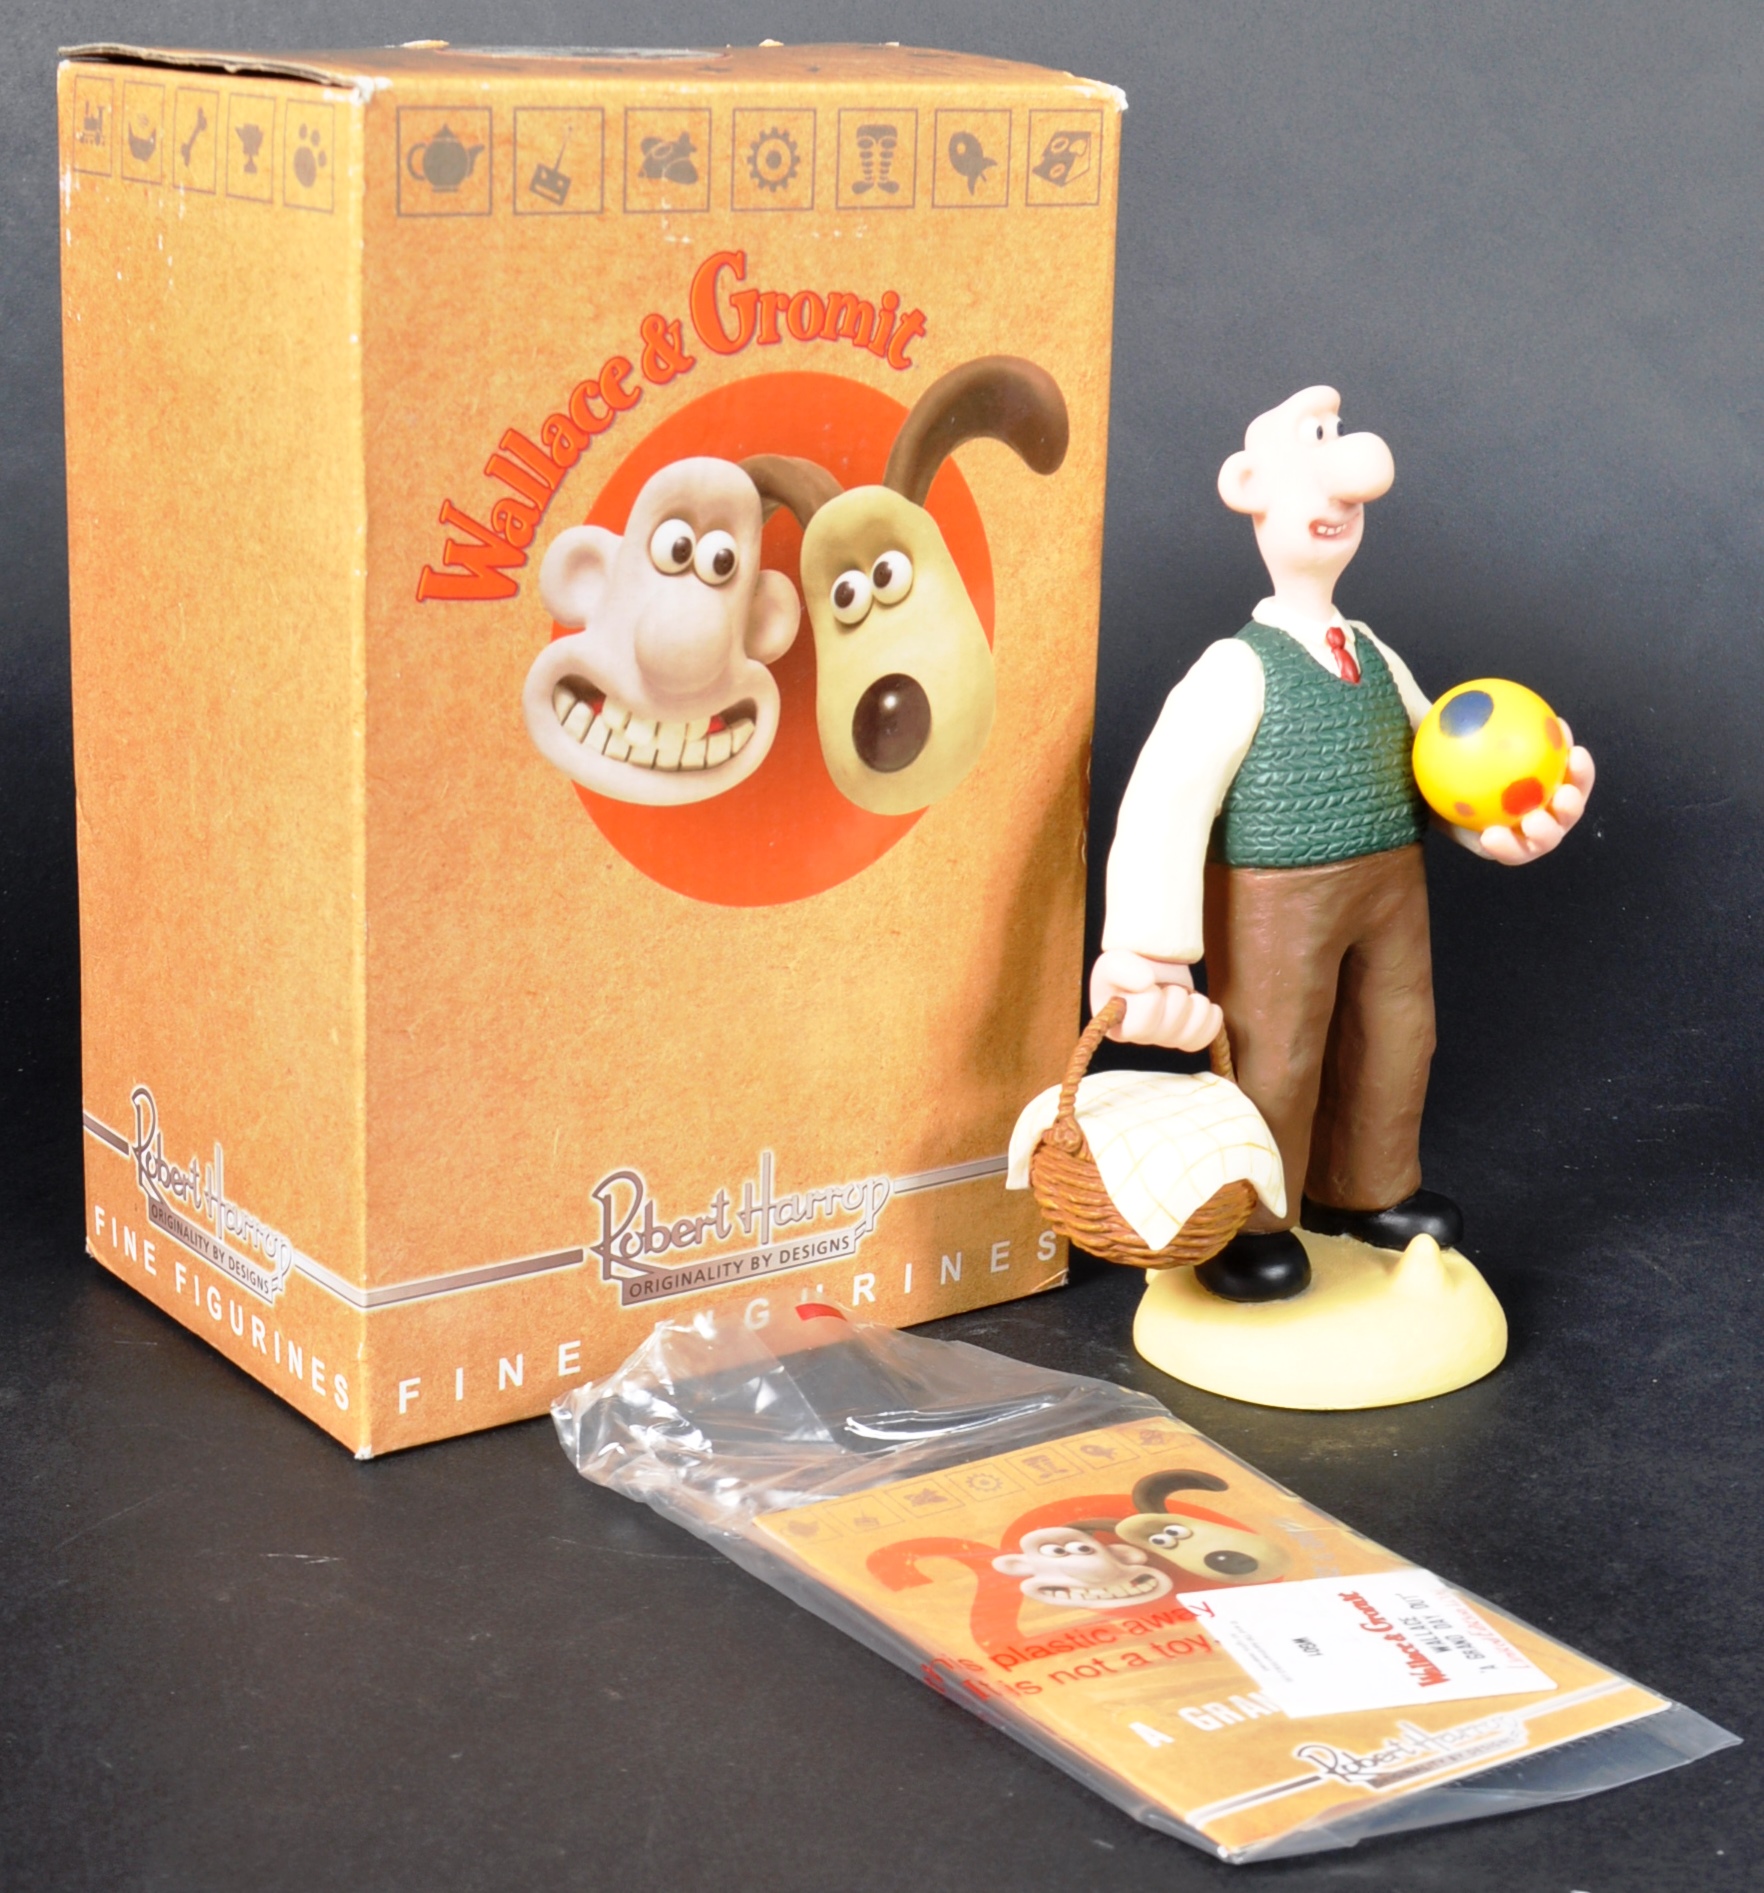 WALLACE & GROMIT - ROBERT HARROP - SIGNED LIMITED EDITION FIGURINE